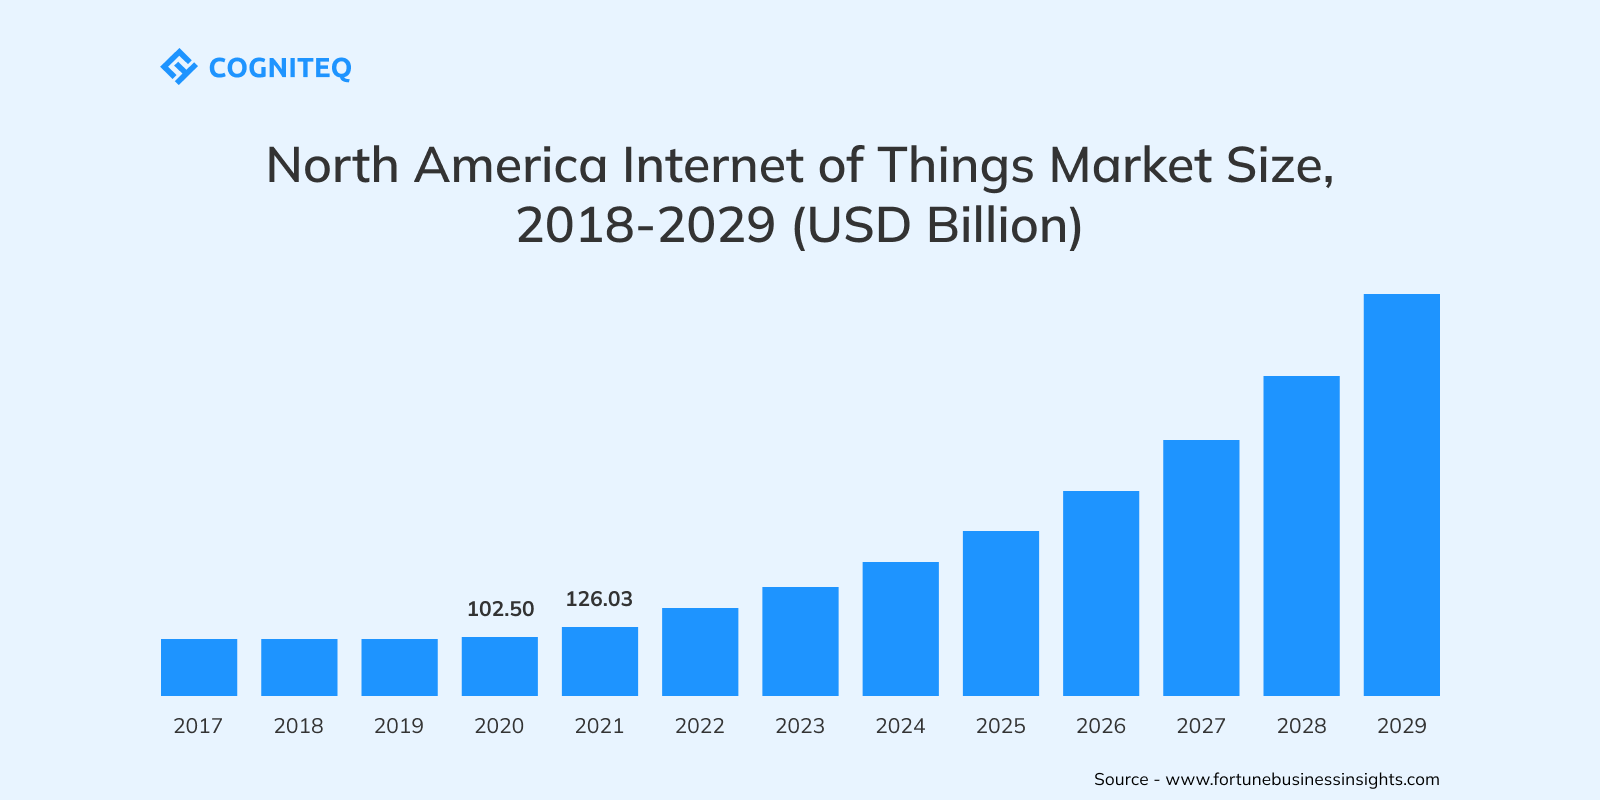 North America Internet of Things Market Size